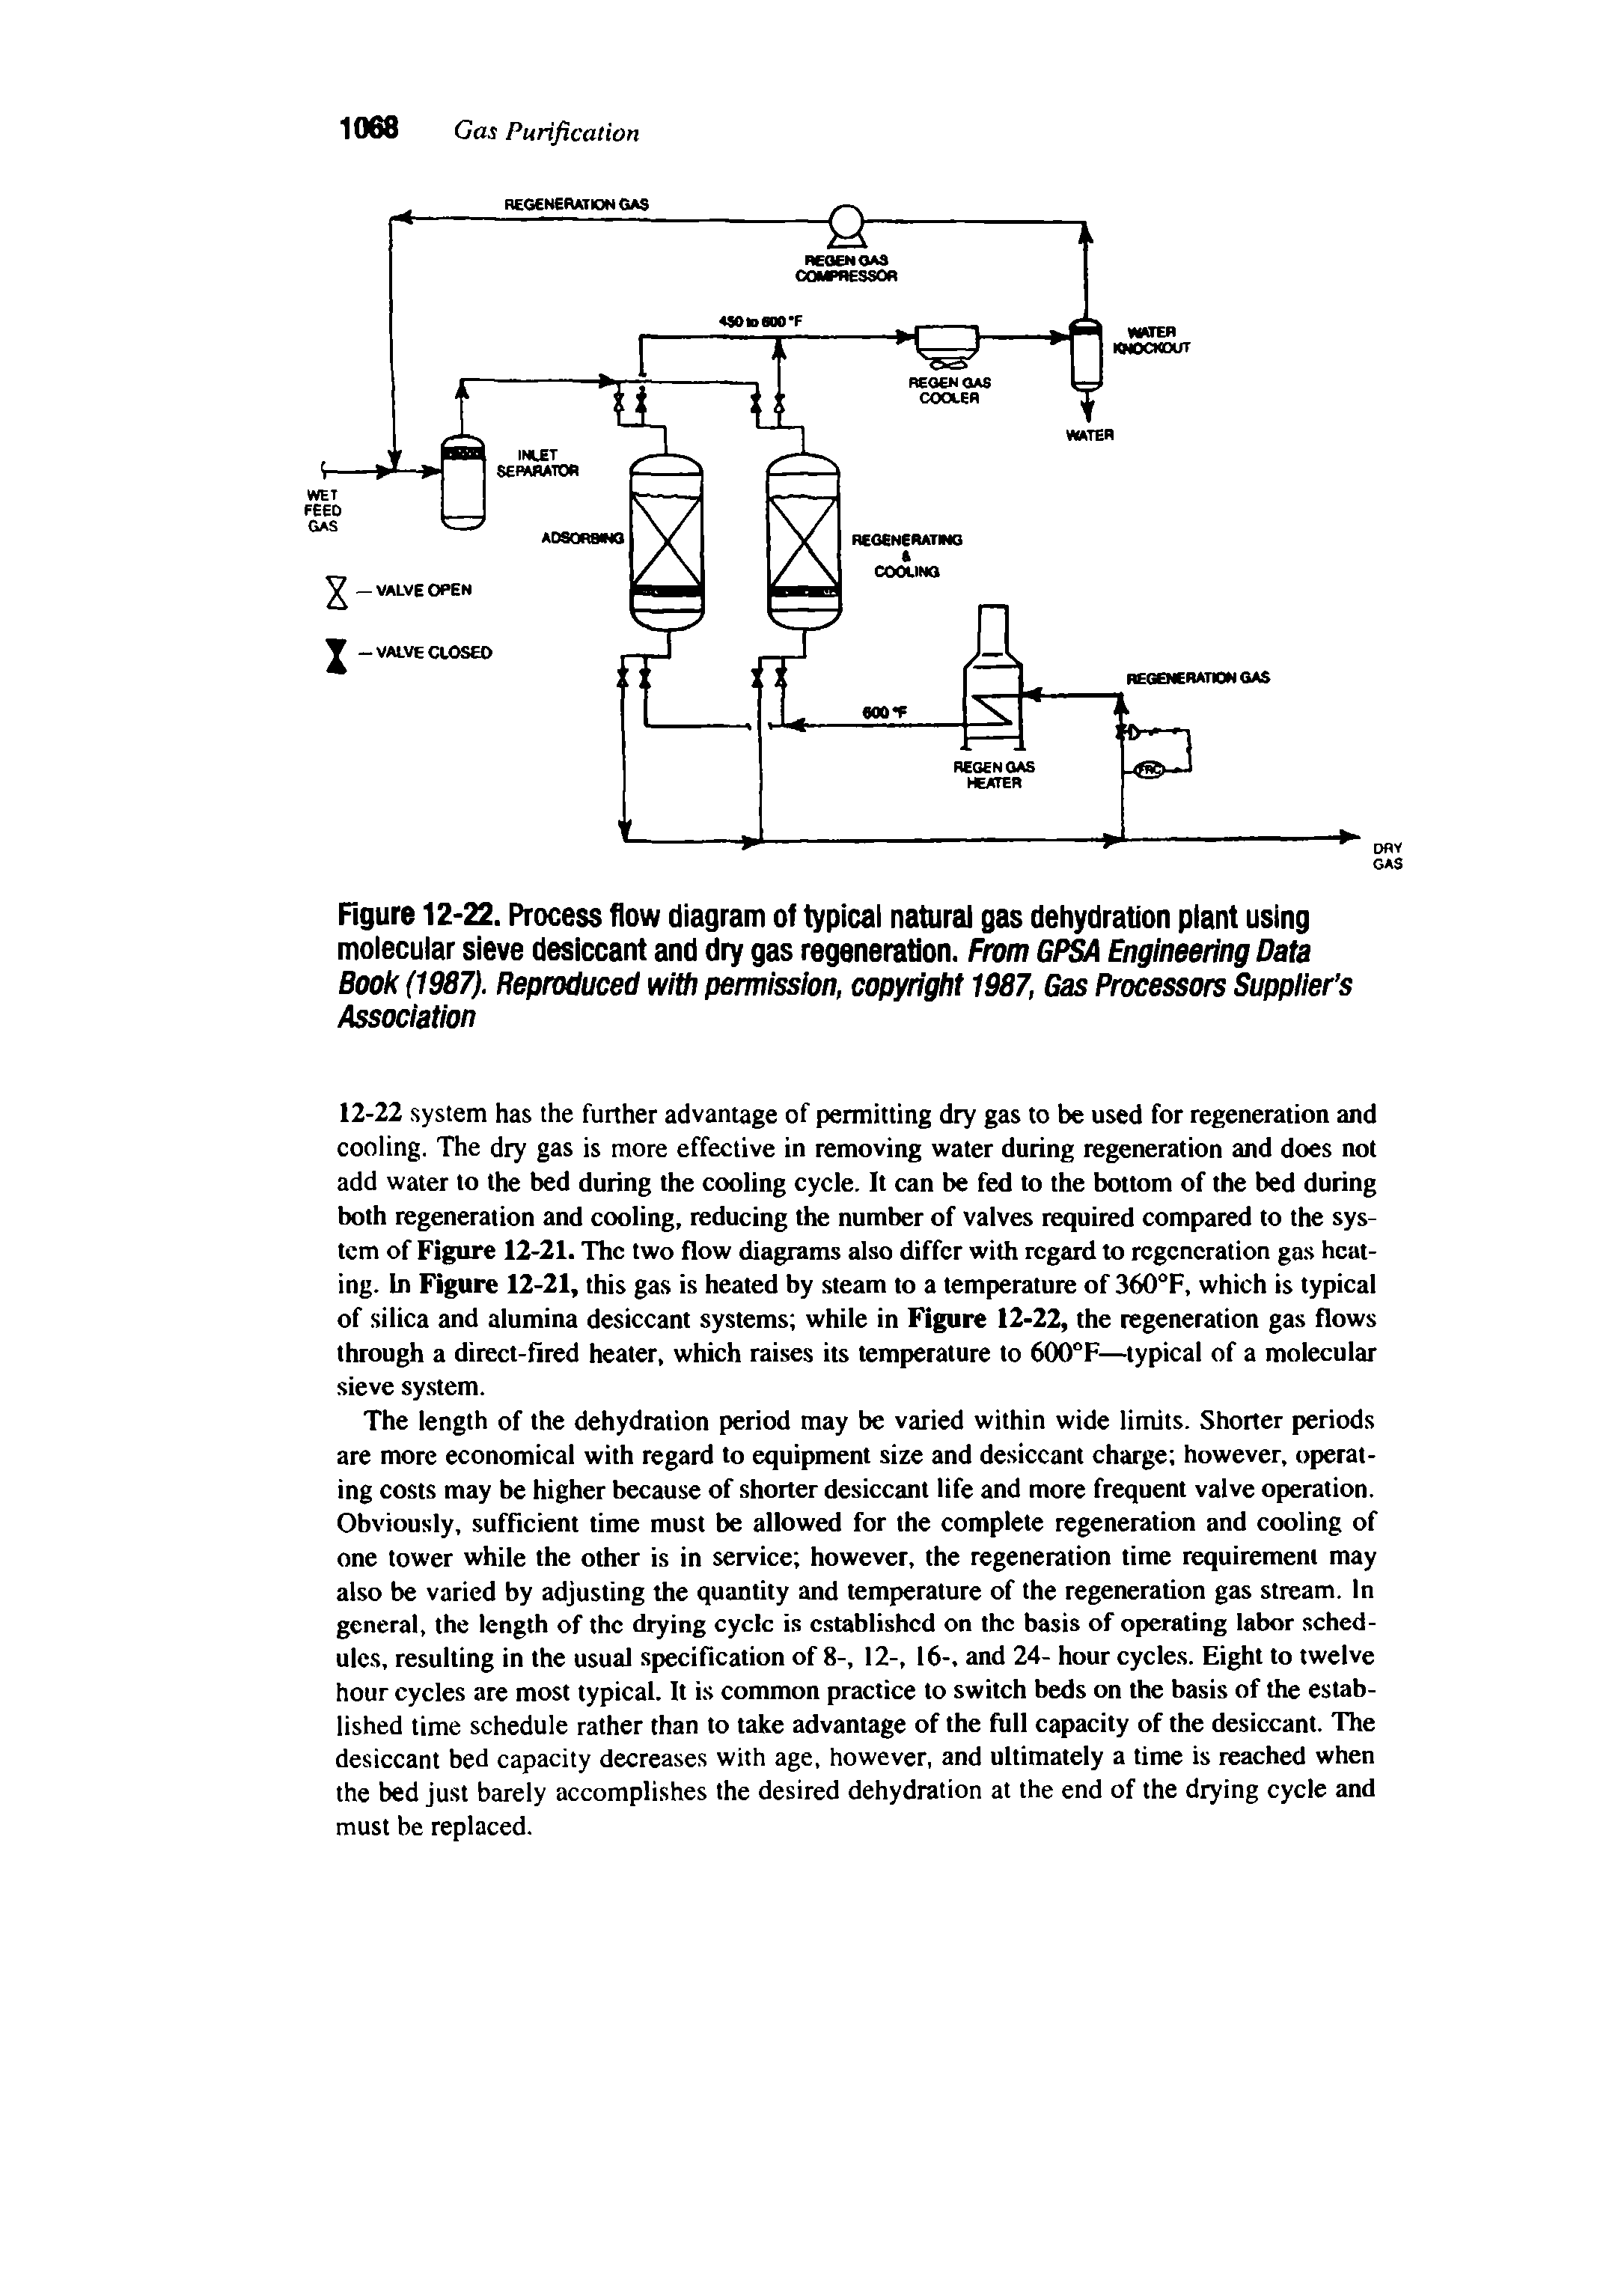 Figure 12-22. Process flow diagram of typical natural gas dehydration plant using molecular sieve desiccant and dry gas regeneration. From GPSA Engineering Data Book (1987). Reproduced witii permission, copyright 1987, Gas Processors Supplier s Association...